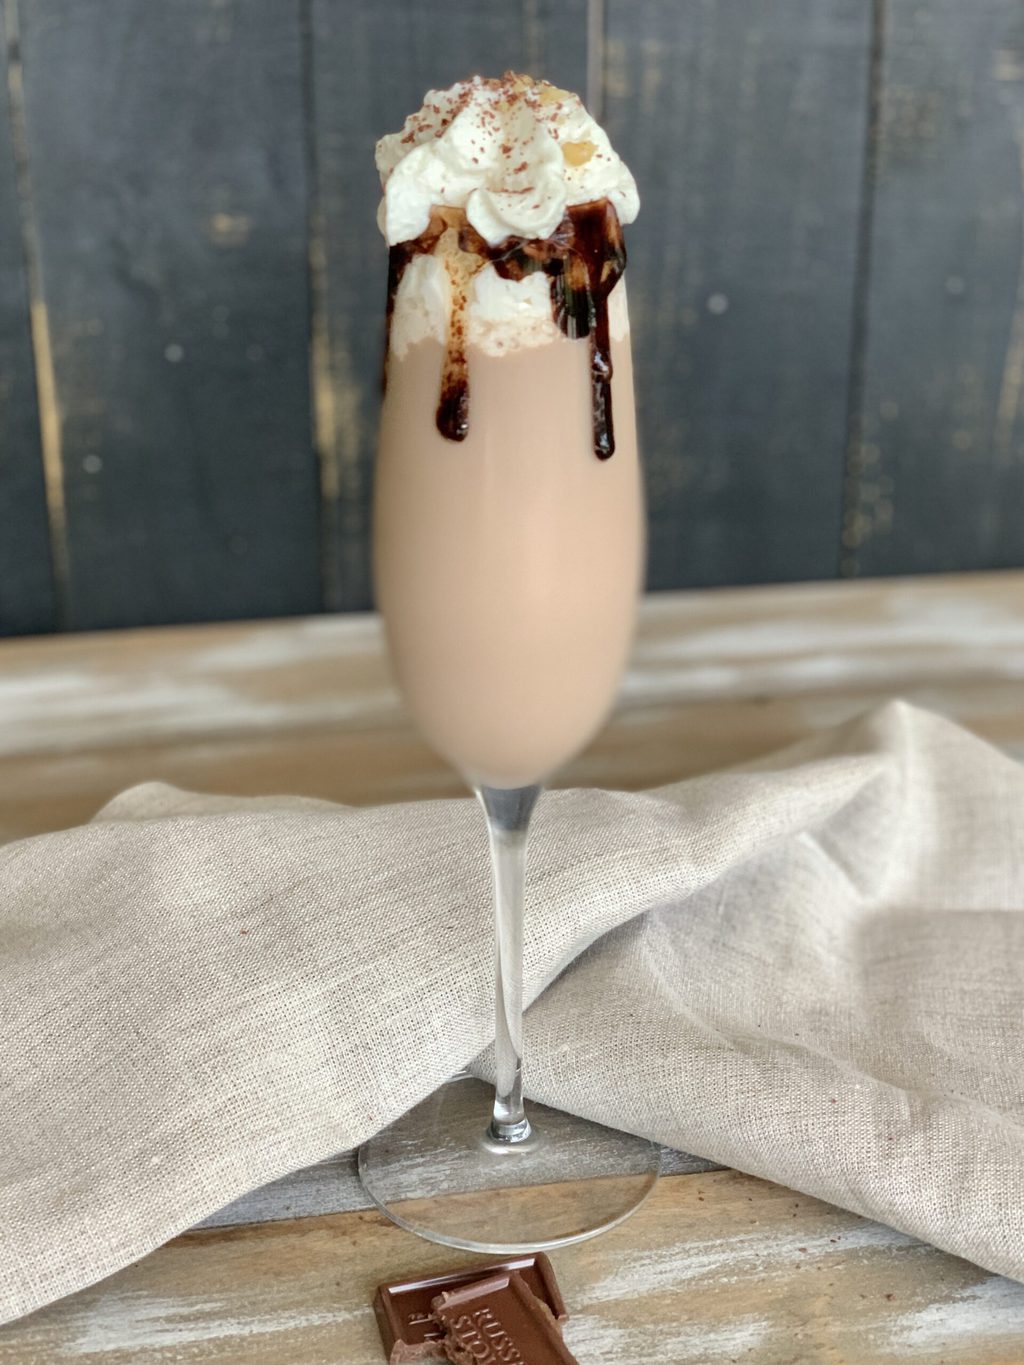 If you're wondering how to make a turtle cocktail, I've got you covered. We've taken all the deliciousness that's in a chocolate, caramel, and pecan turtle cluster and put it in an adult beverage.